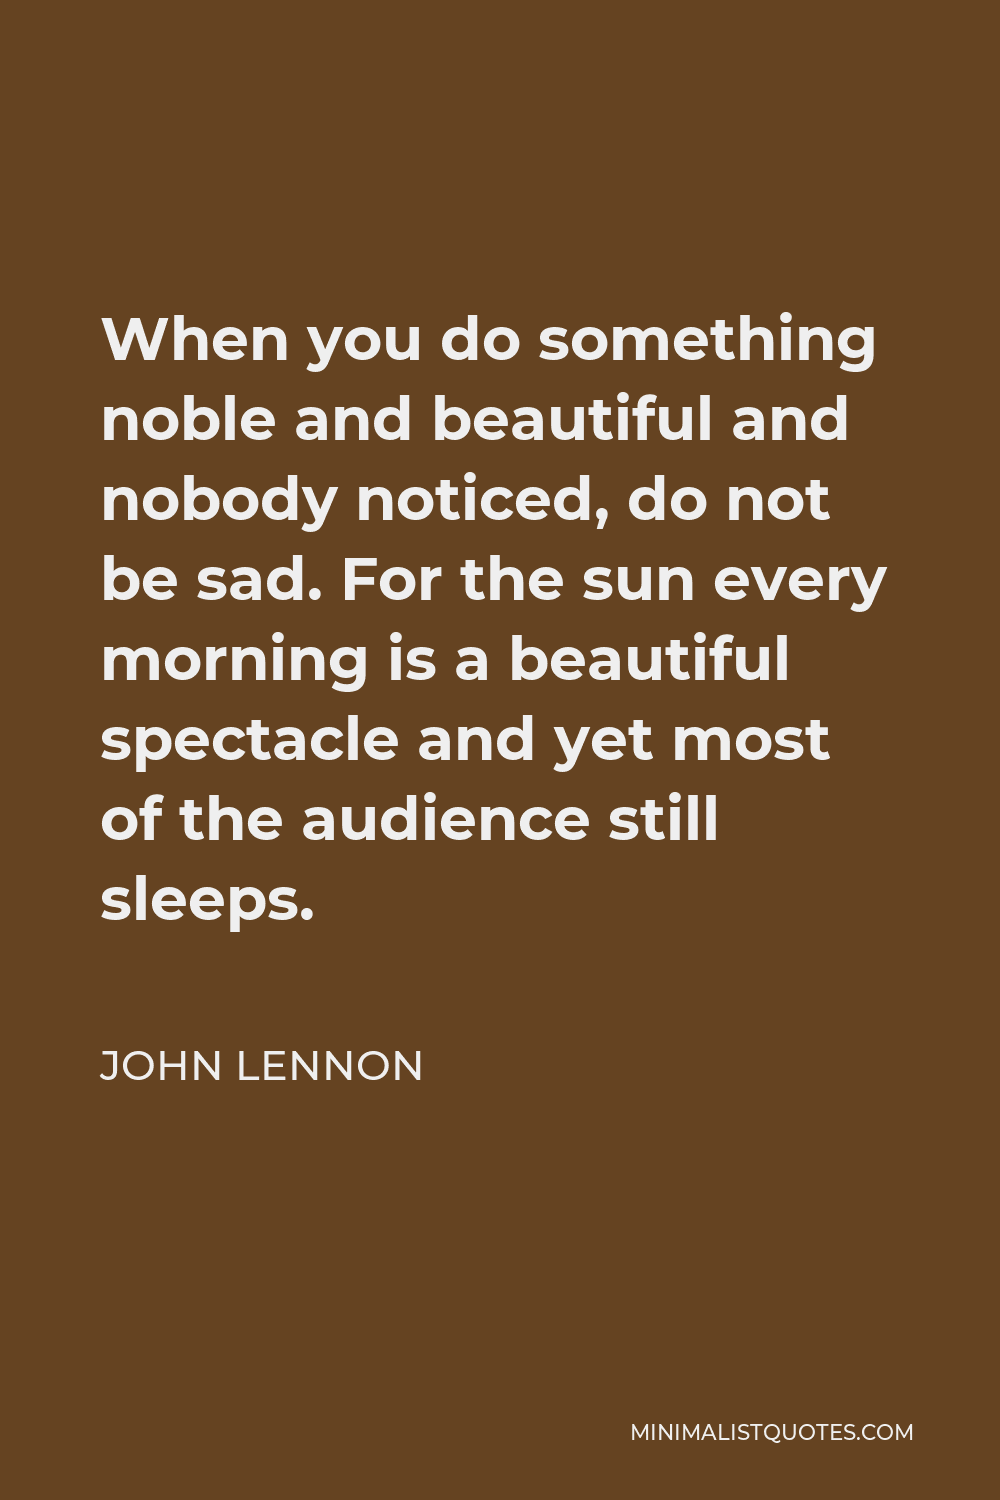 John Lennon Quote - When you do something noble and beautiful and nobody noticed, do not be sad. For the sun every morning is a beautiful spectacle and yet most of the audience still sleeps.